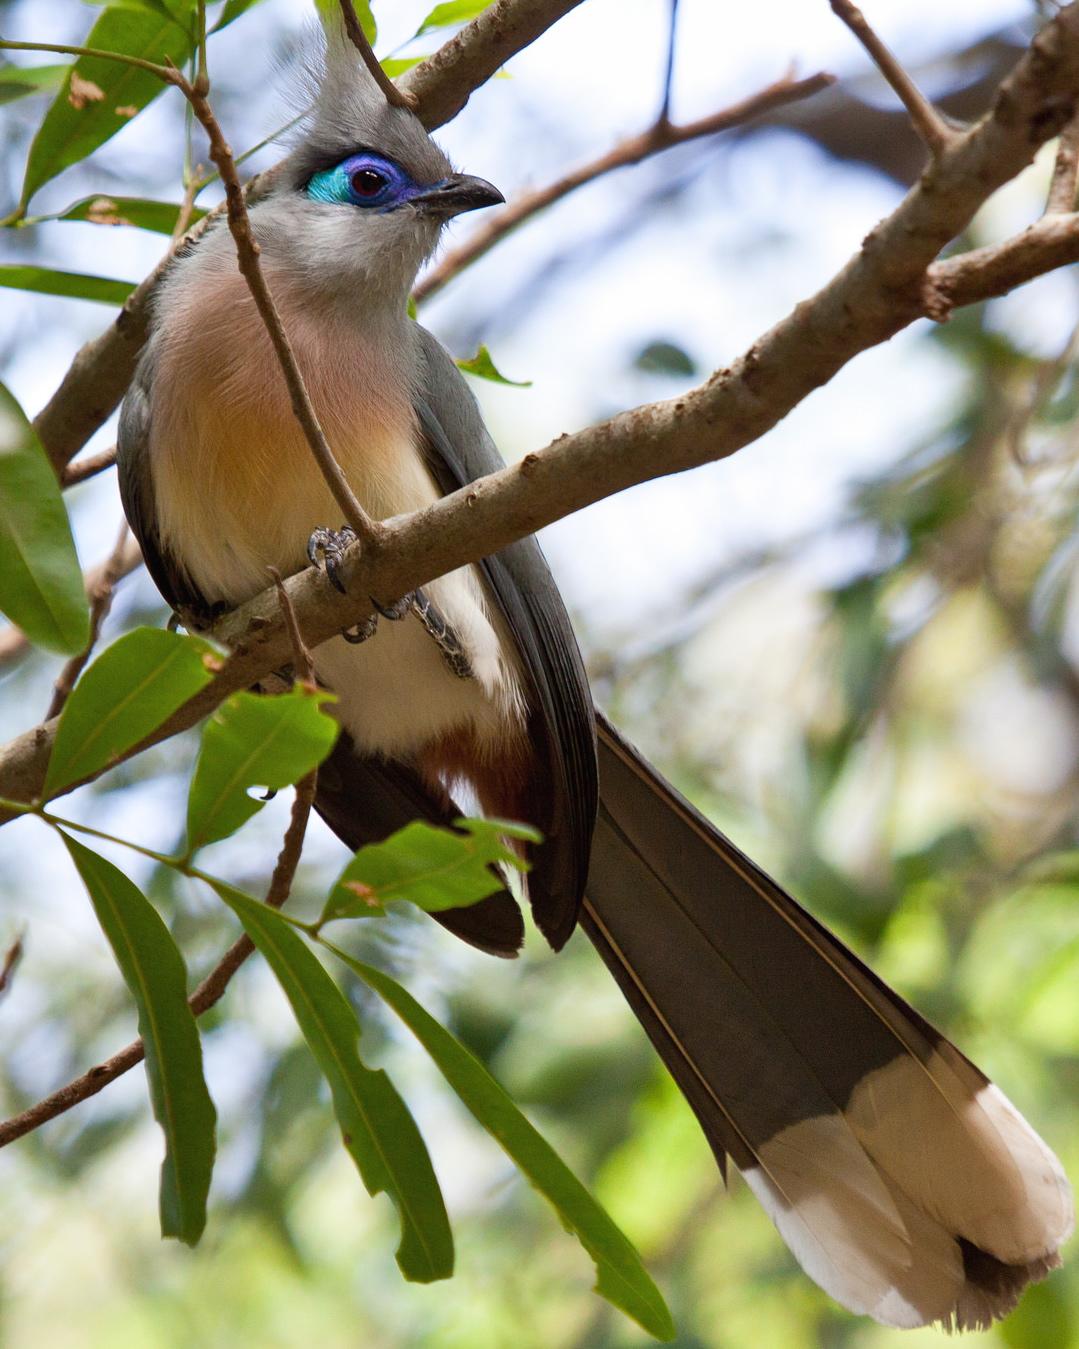 Crested Coua Photo by Sue Wright